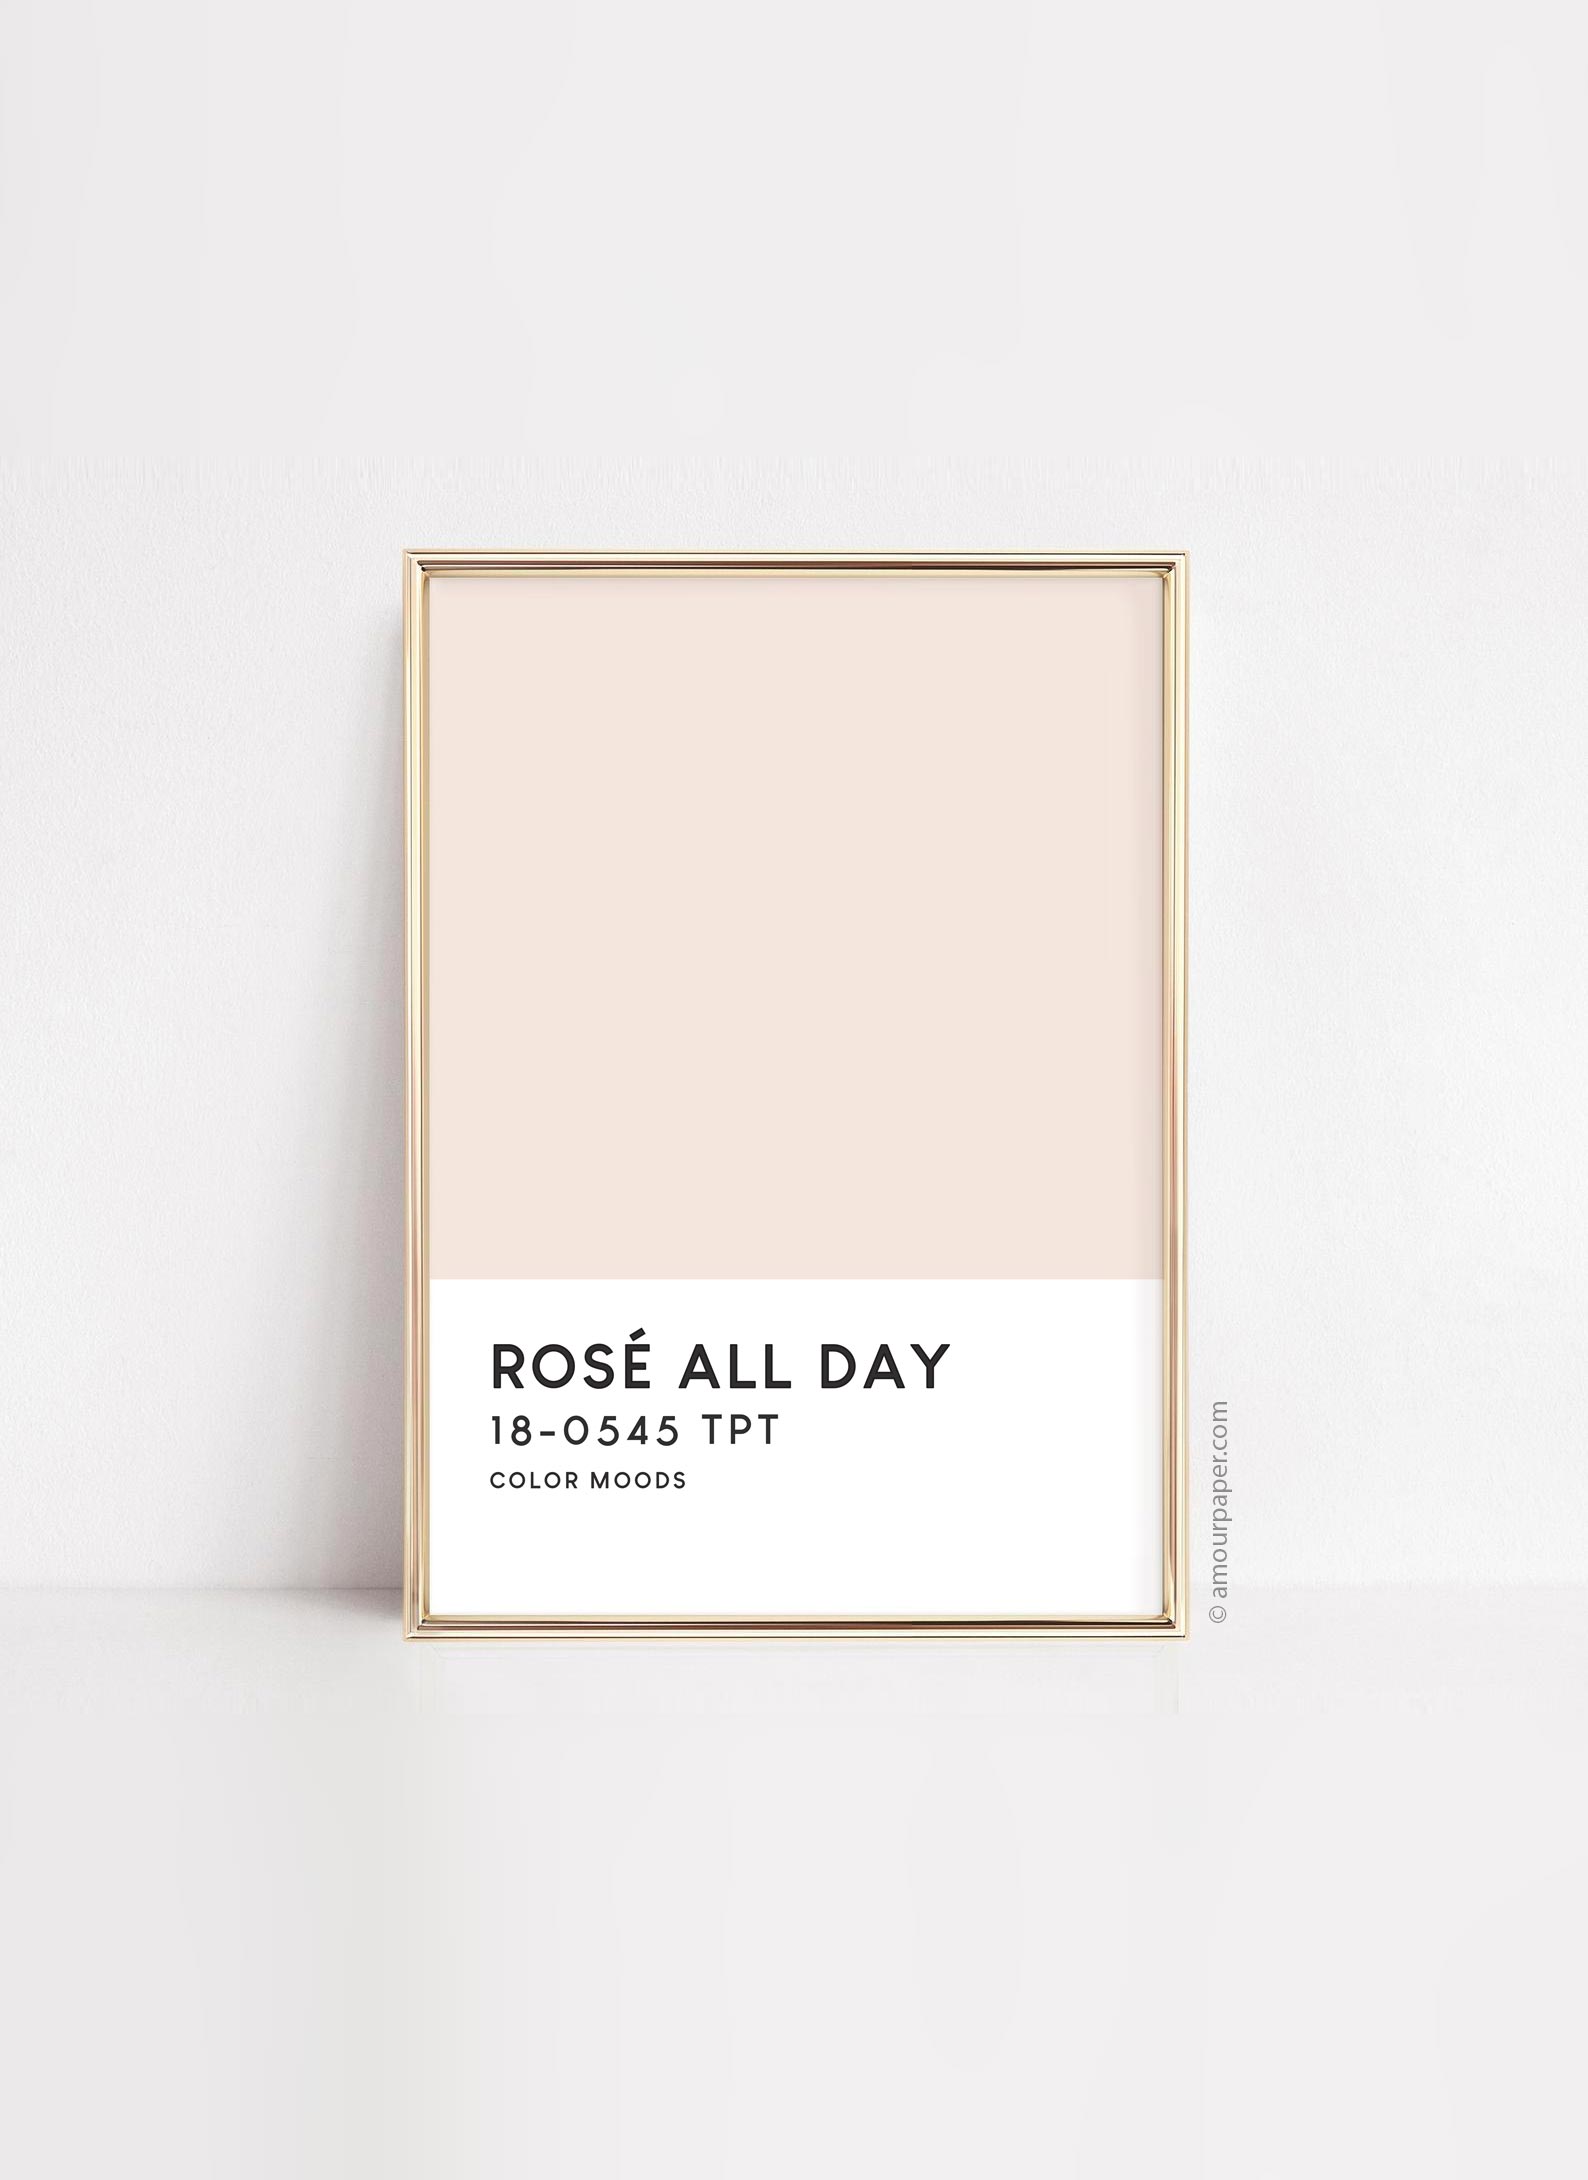 Affiche Rosé all day chic